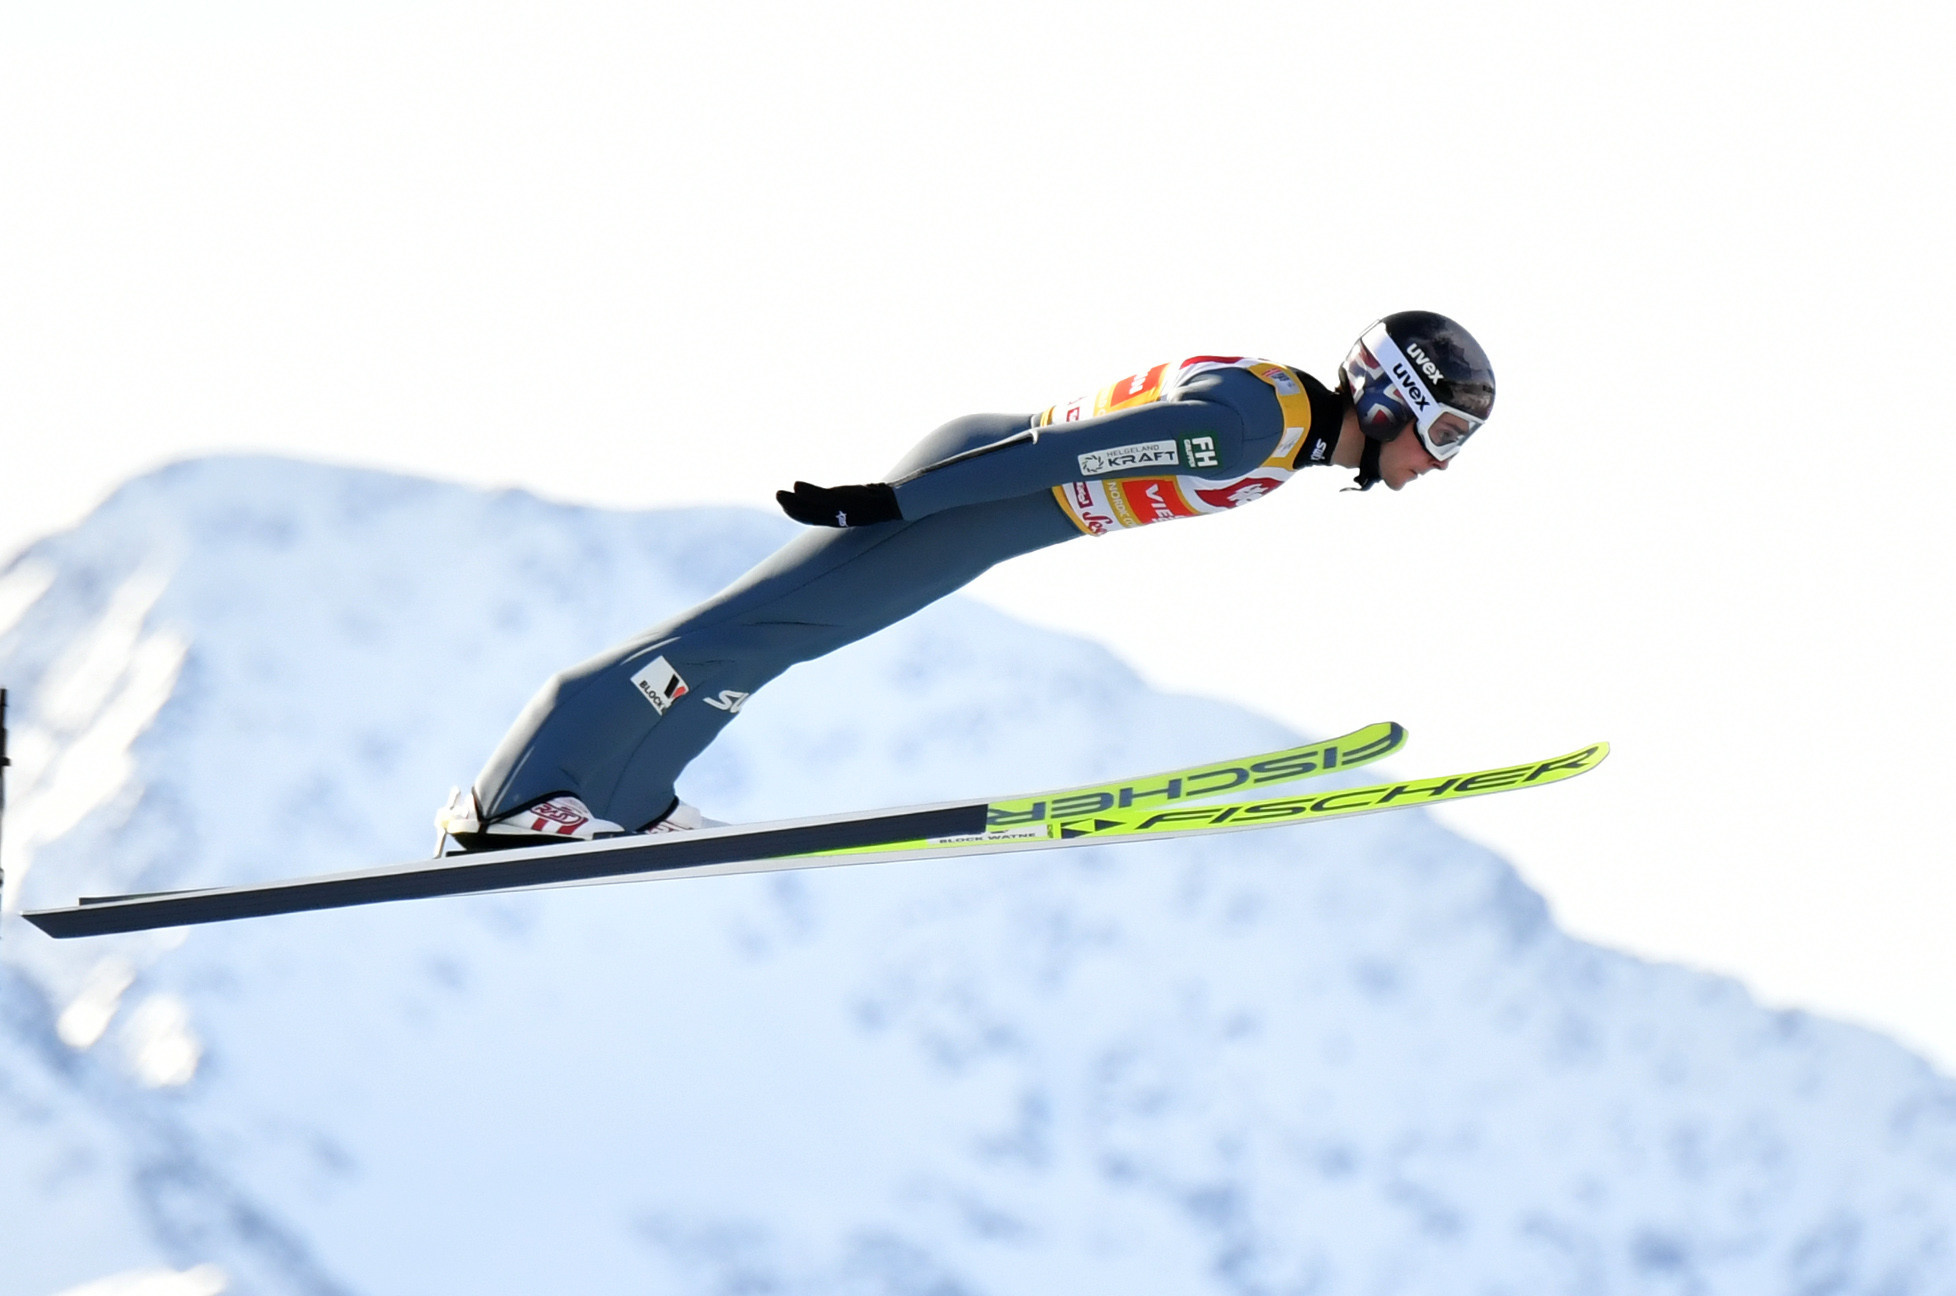 The Norwegian topped the standings after the ski jumping round in Seefeld ©Getty Images